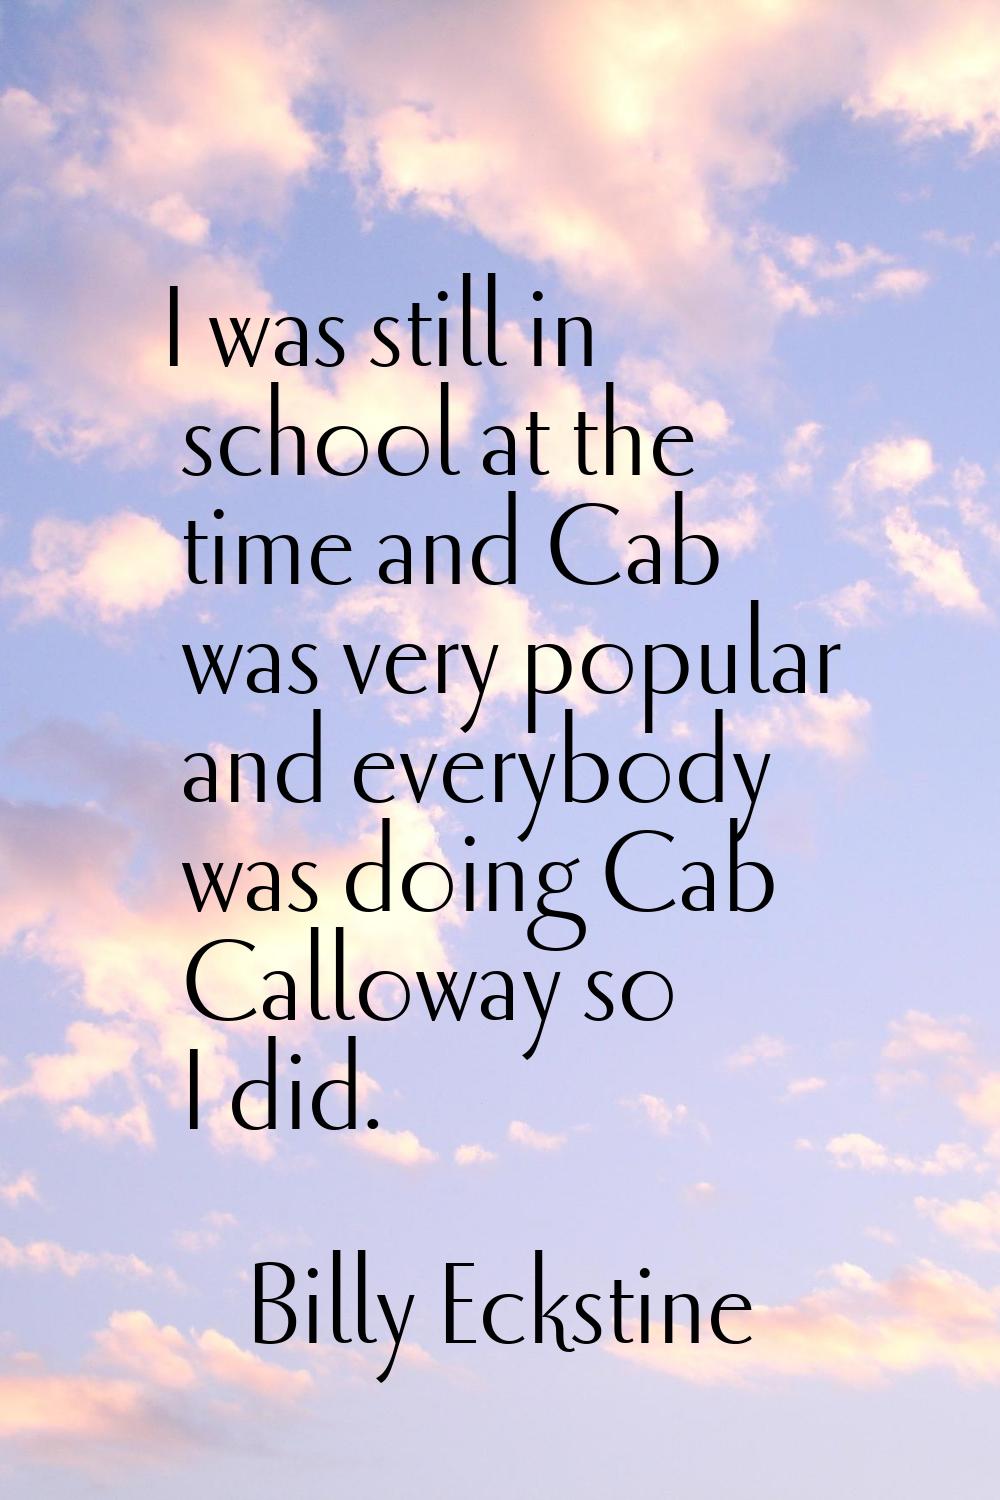 I was still in school at the time and Cab was very popular and everybody was doing Cab Calloway so 